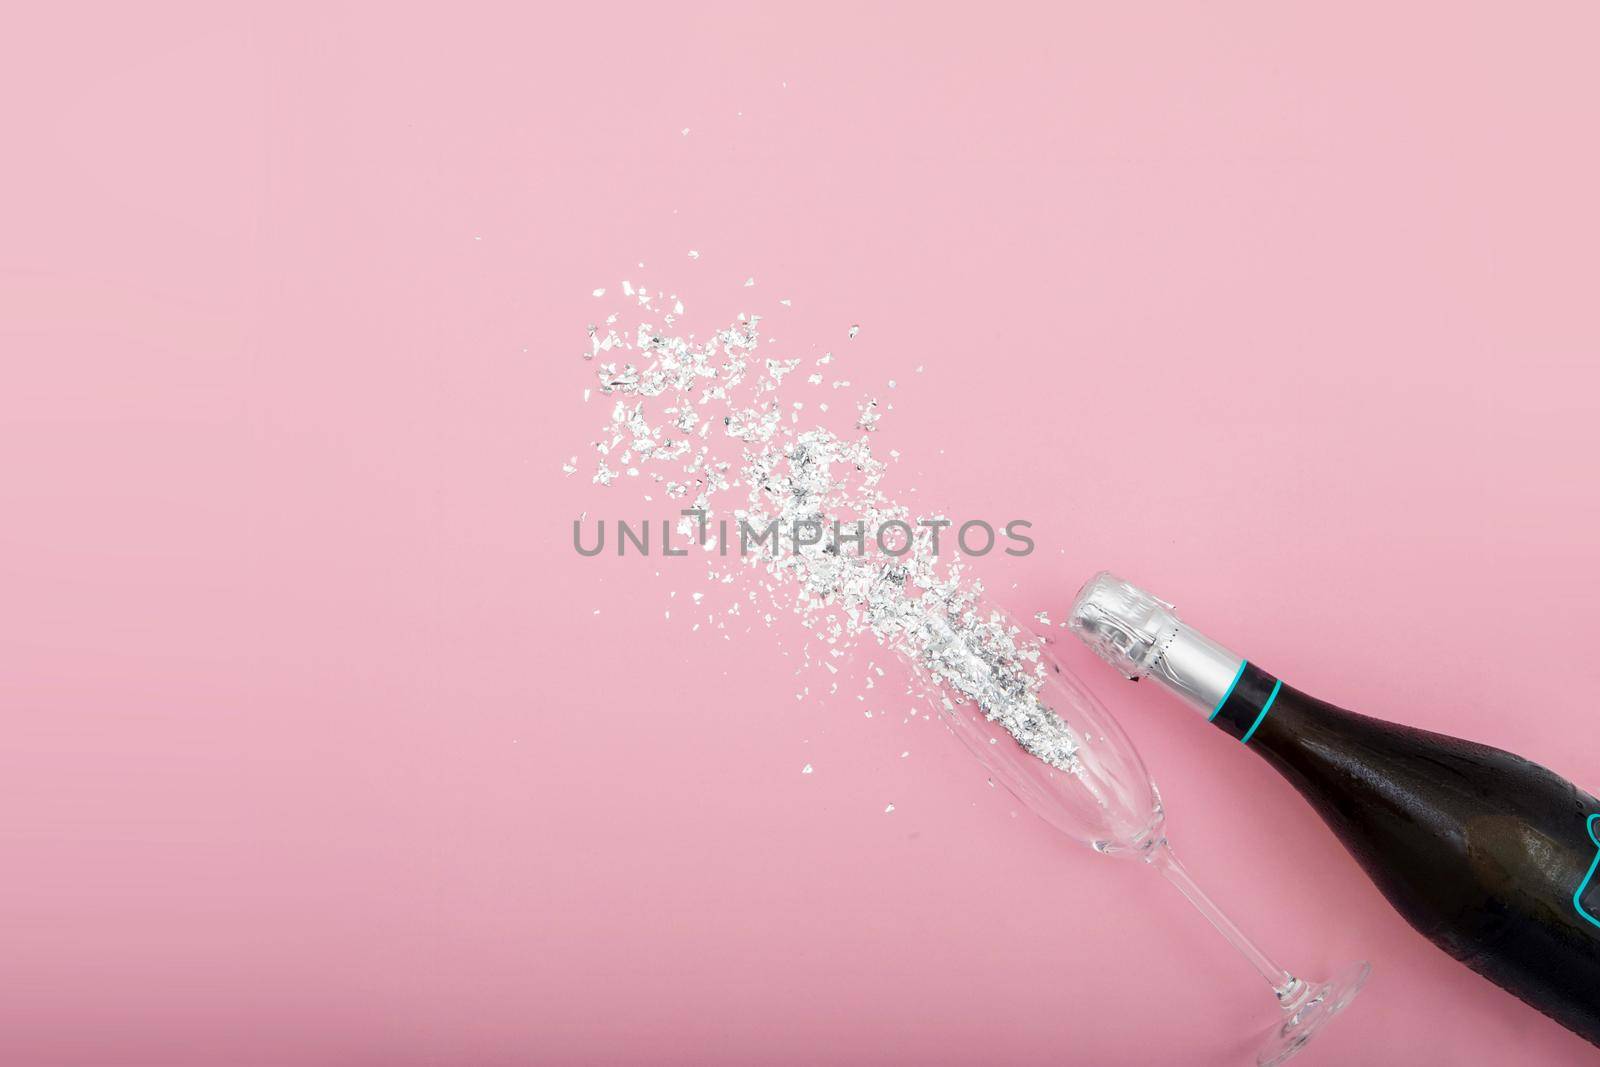 Bottle of champagne and glass on pink table with glitter by Demkat